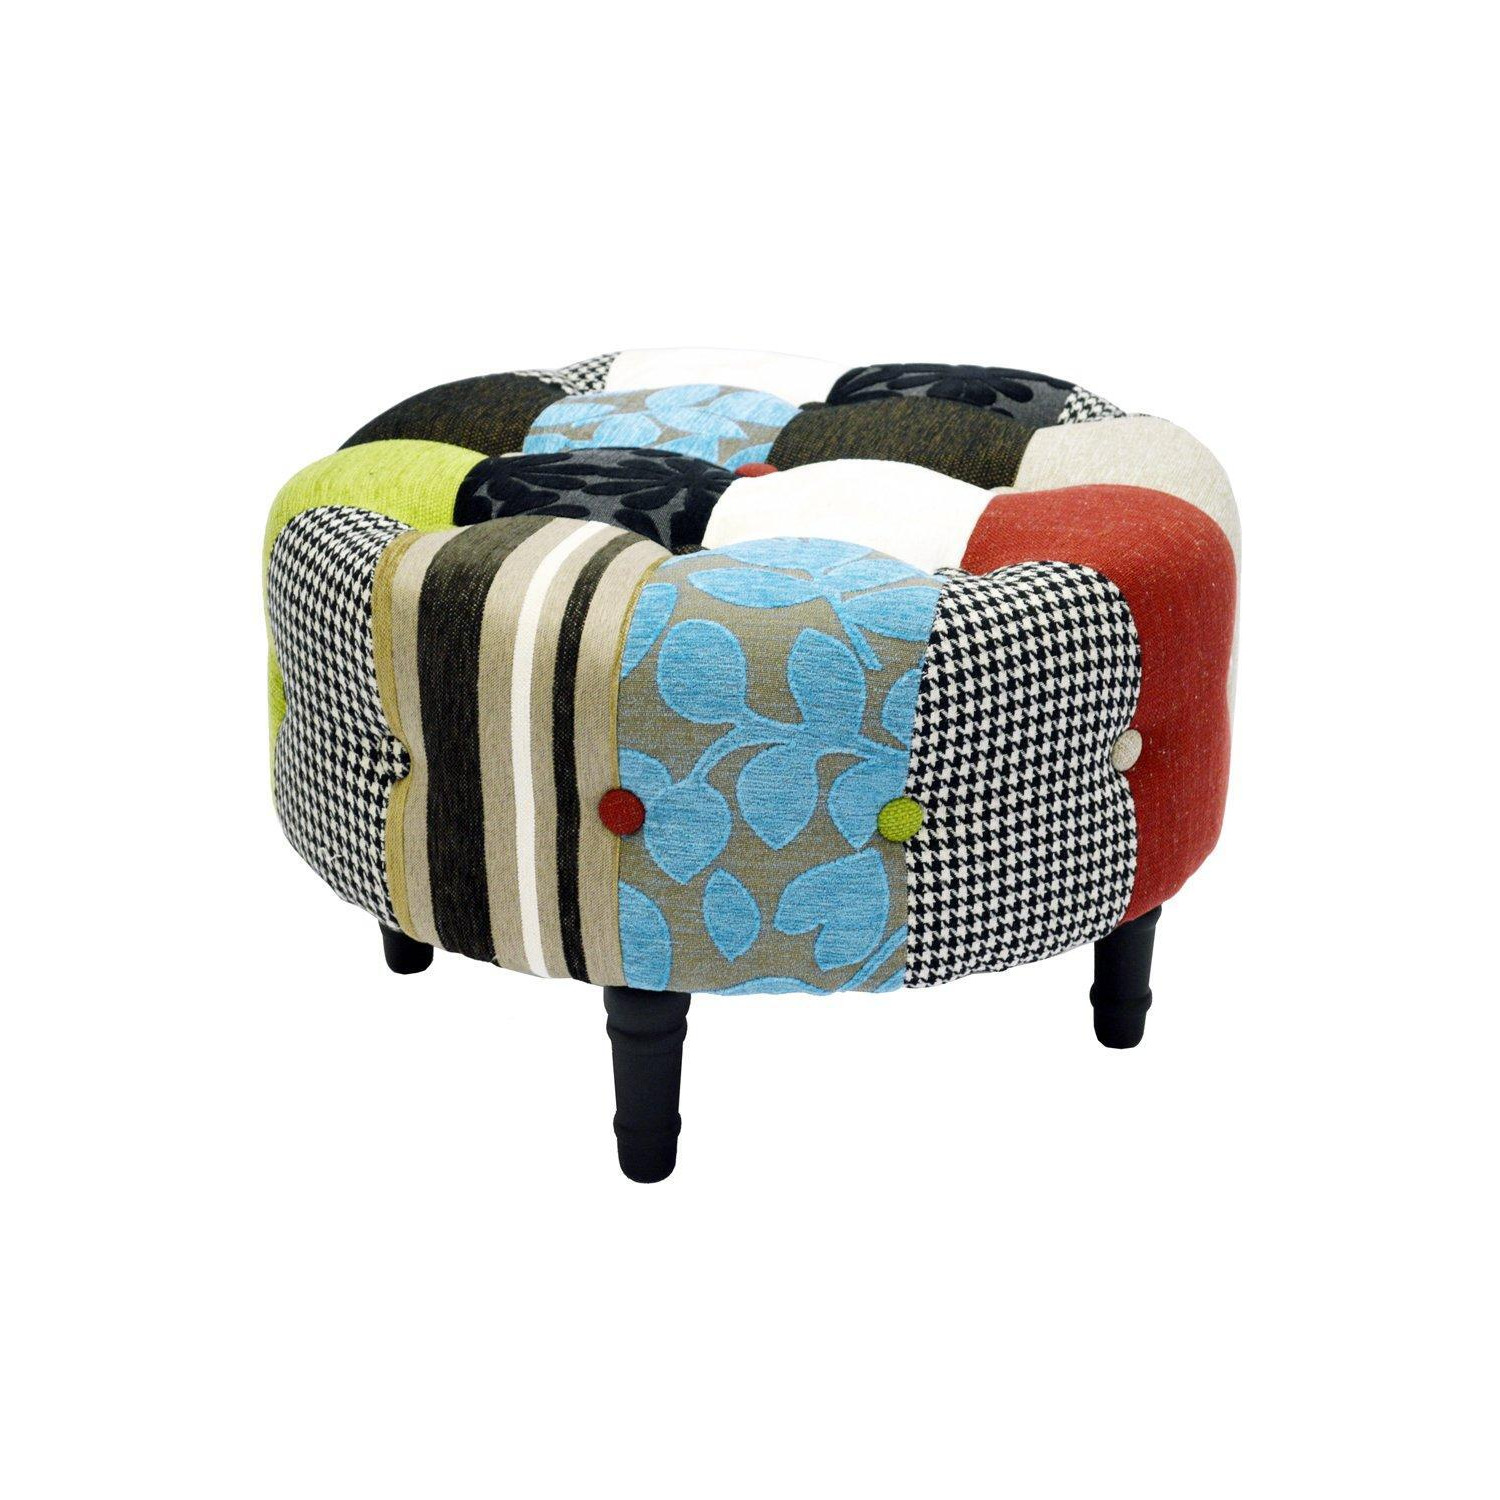 Plush Patchwork - Round Pouffe Padded Footstool With Wood Legs - Blue  Green  Red - image 1